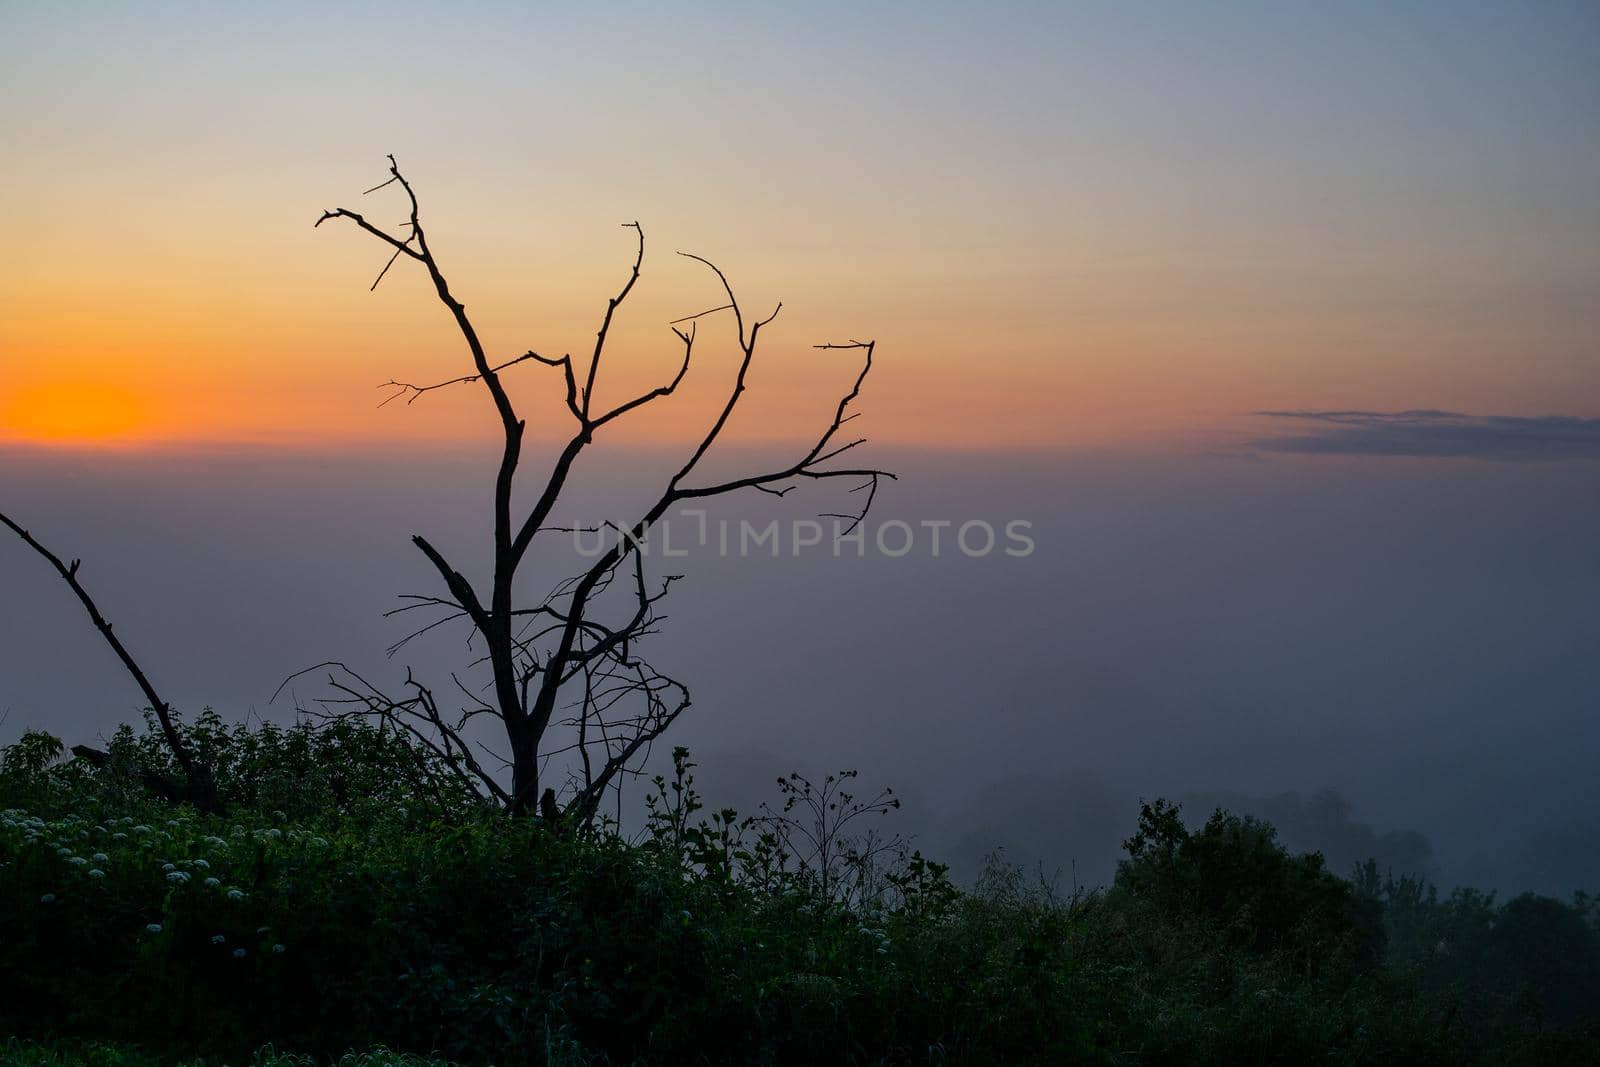 Driftwood on the background of a foggy dawn, summer